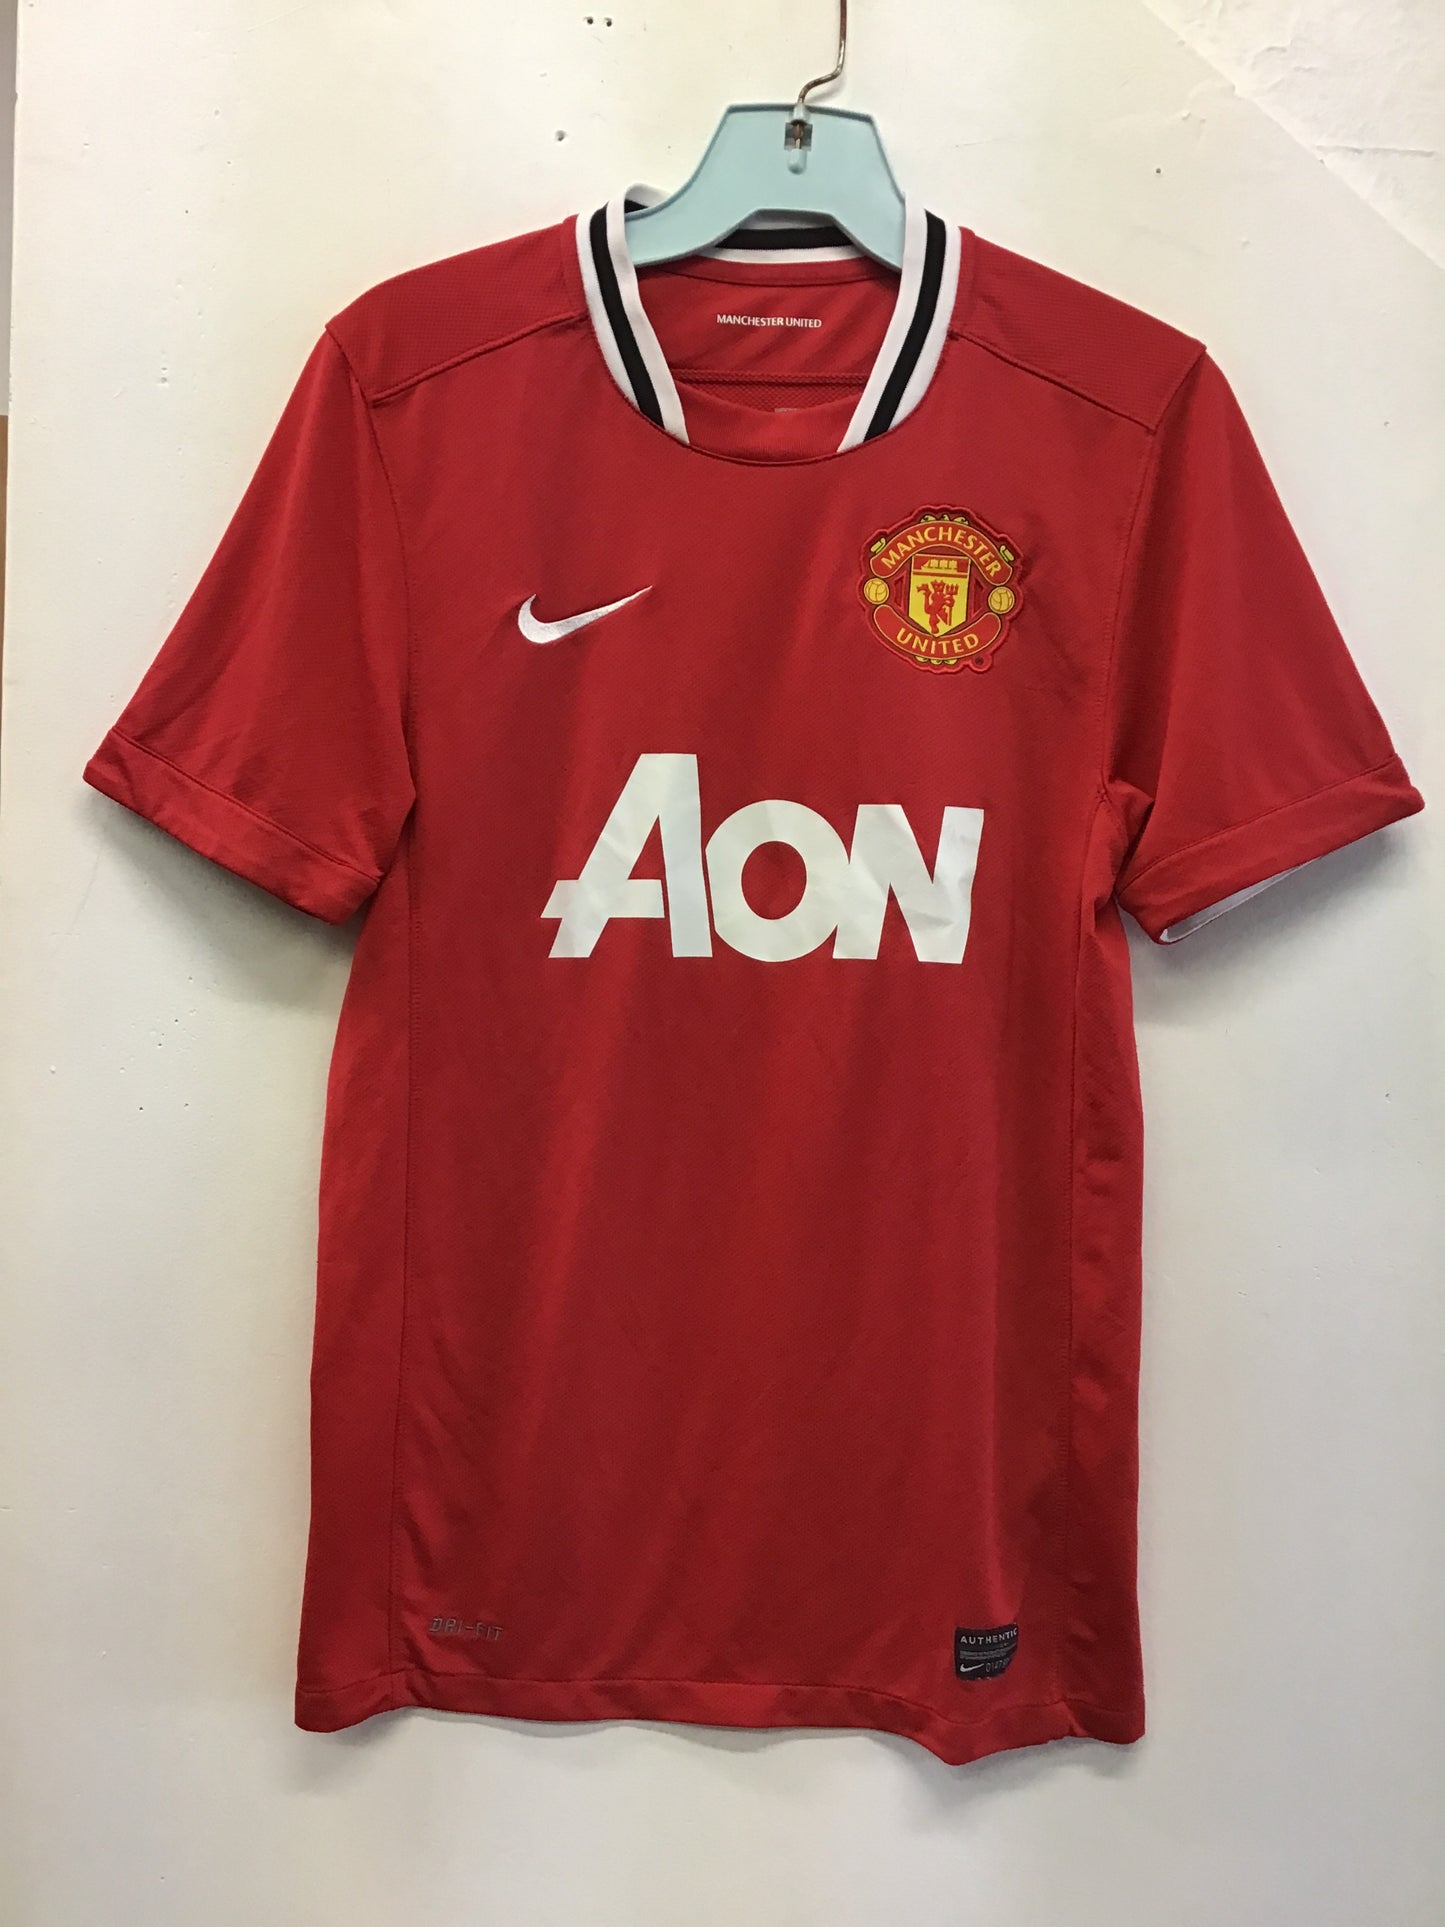 Nike Manchester United Authentic Jersey, Size S